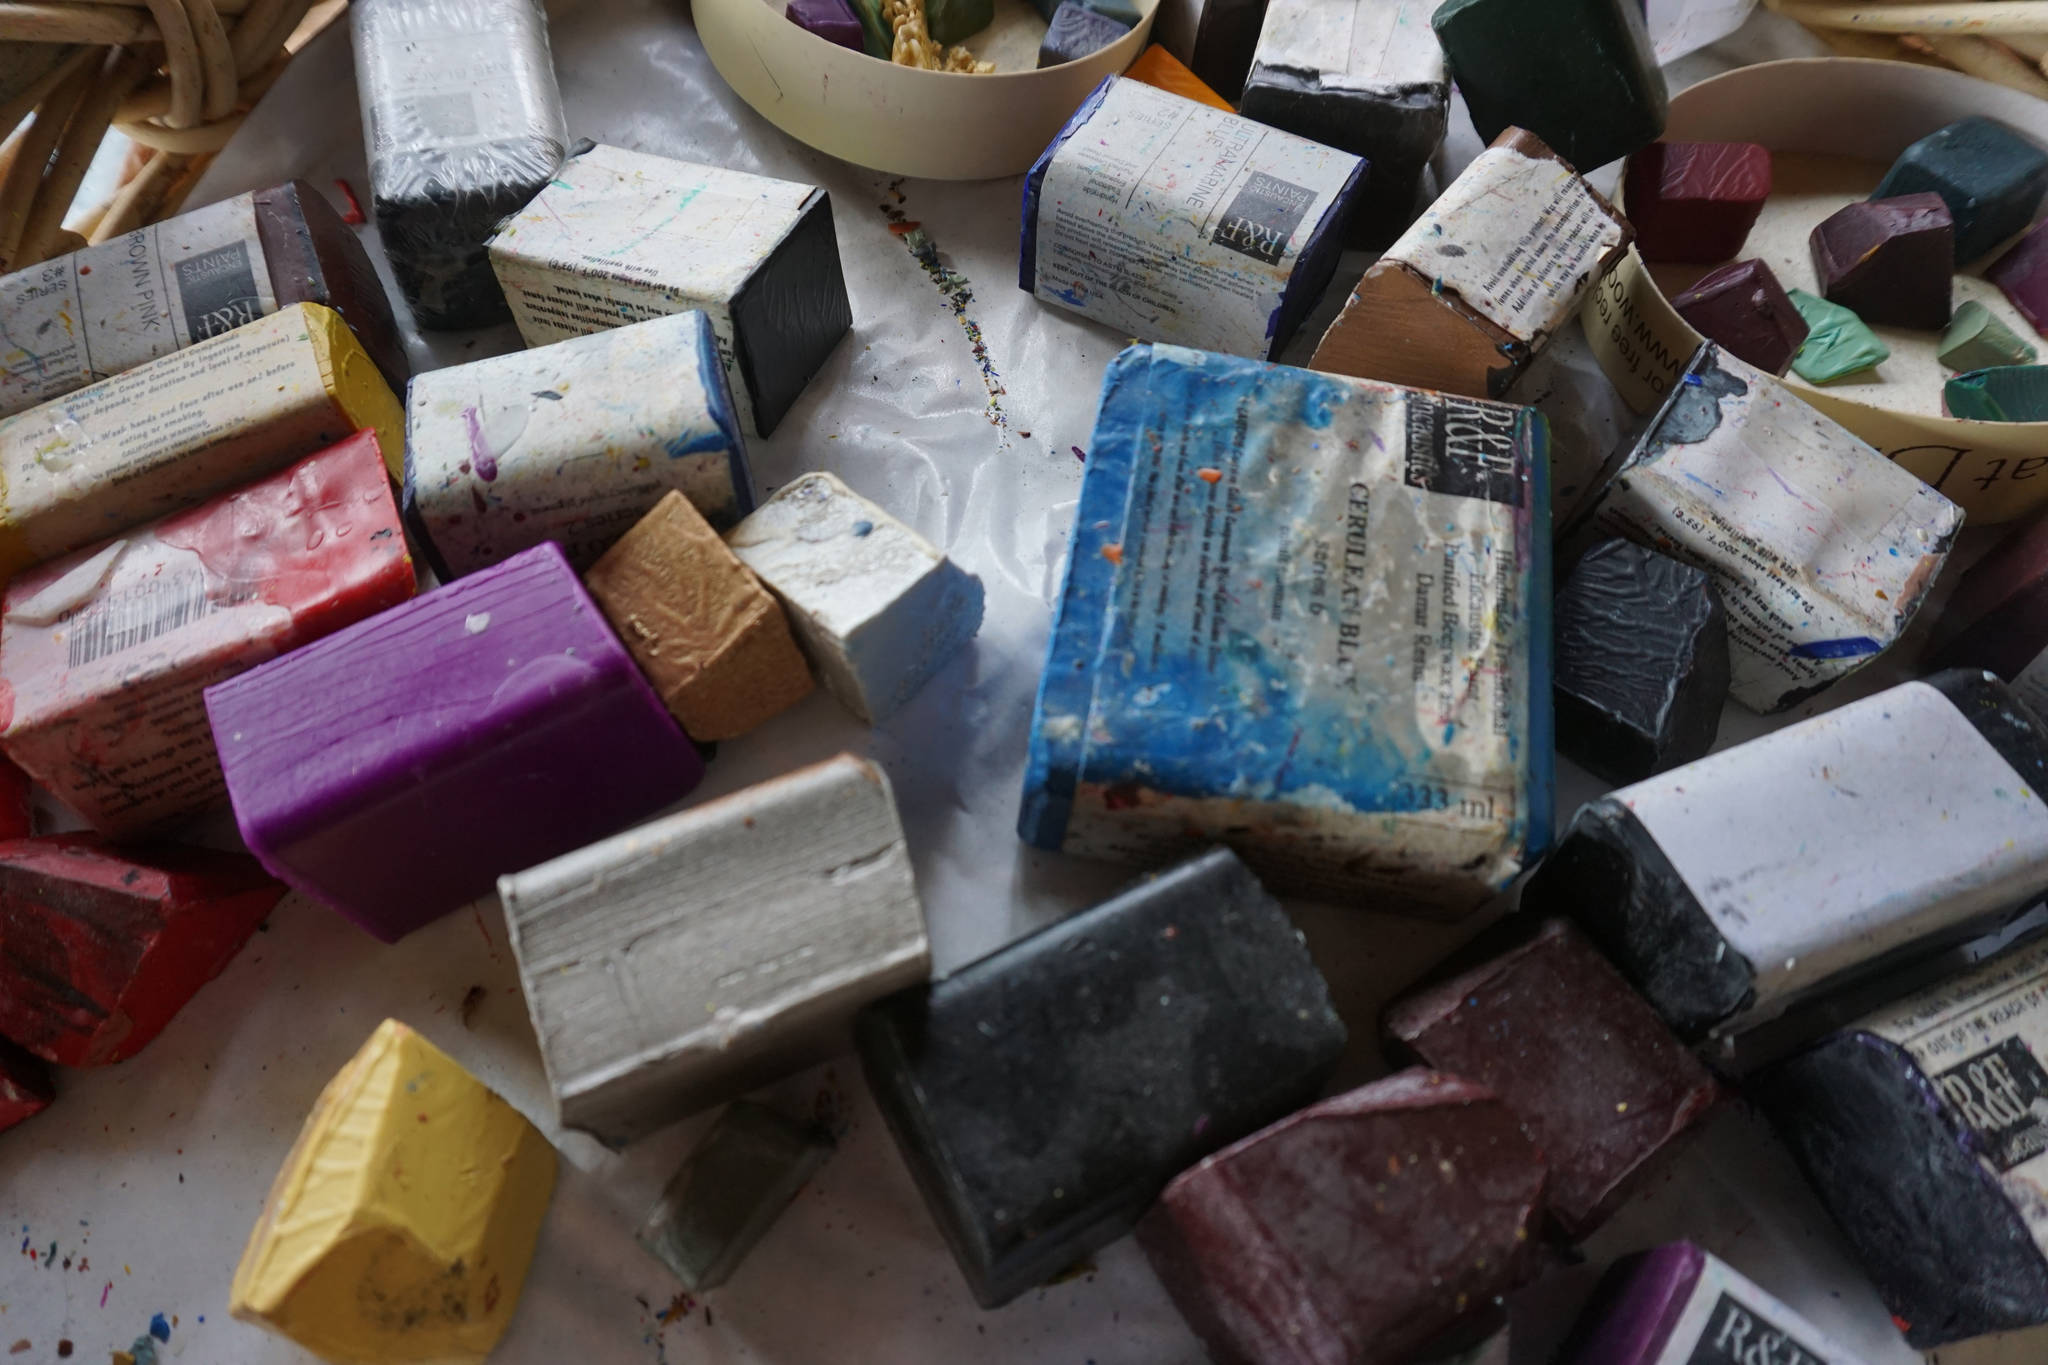 Blocks of encaustic paints fill up a basket at Ann-Margret Wimmerstedt’s encaustic workshop on July 30, 2017. (Photo by Michael Armstrong/Homer News)